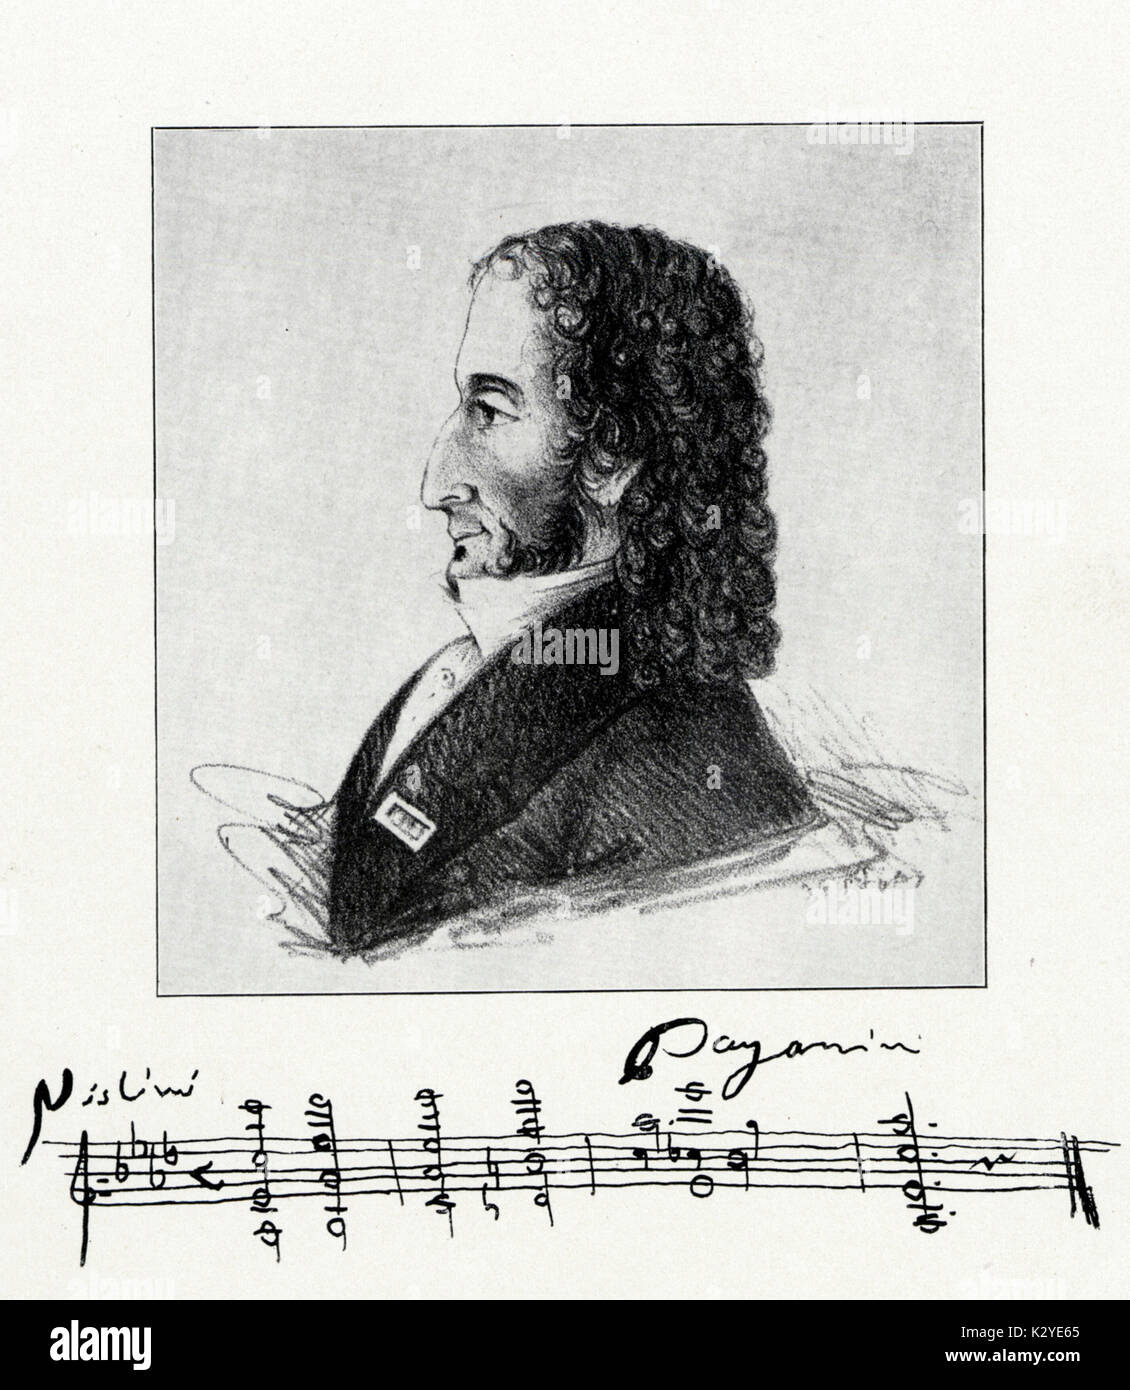 PAGANINI, Niccolo, caricature of head and autograph score. Italian violinist and composer 27 October 1782 - 27 May 1840. Stock Photo